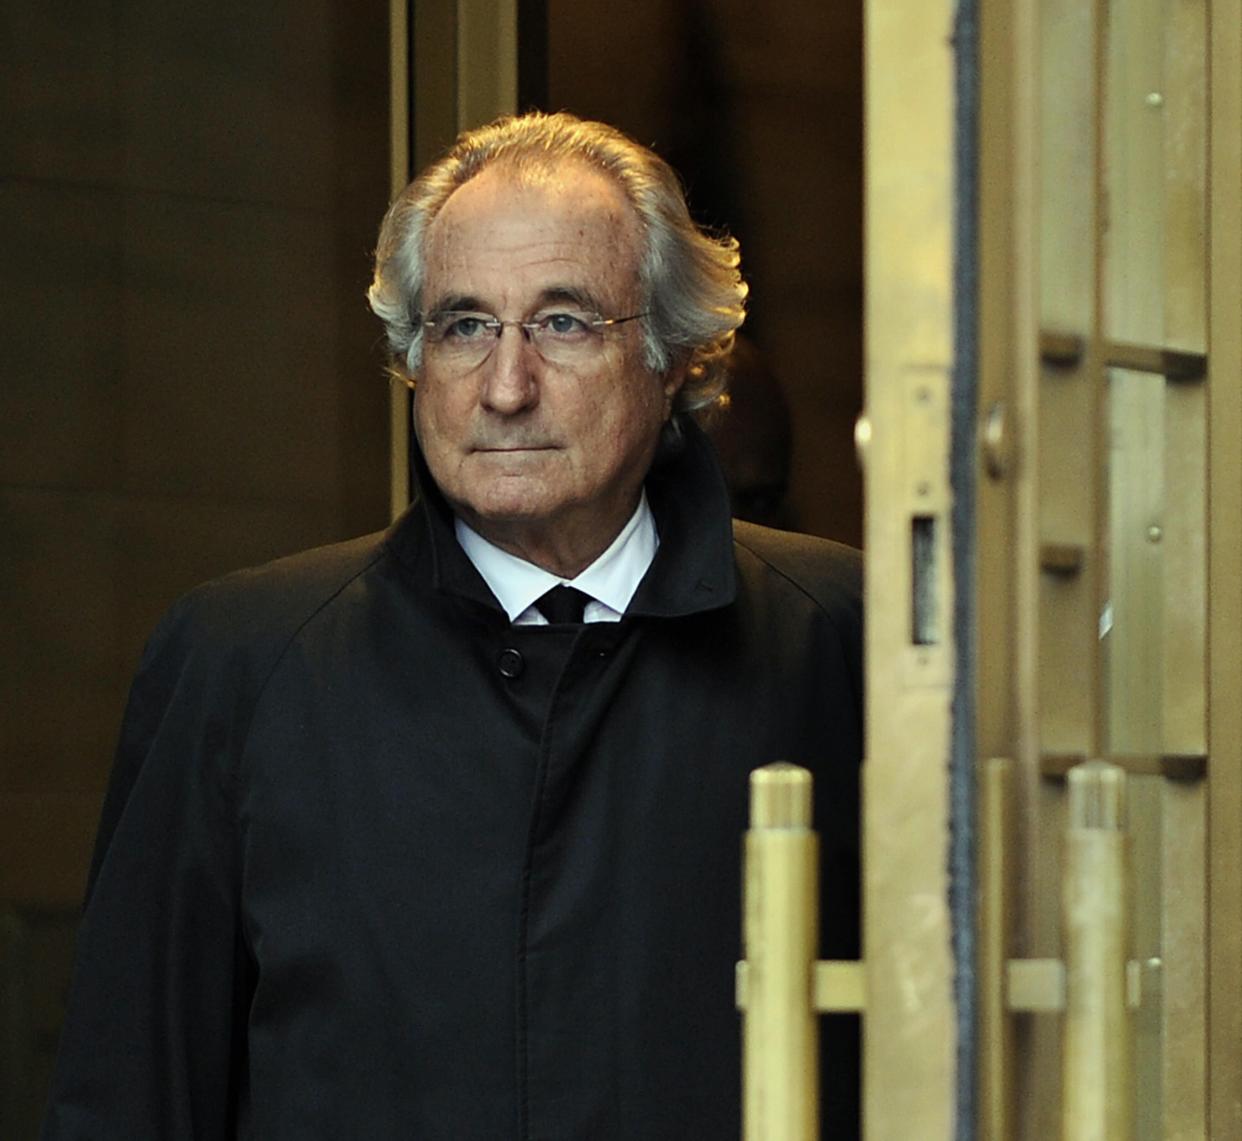 New York financier turned Ponzi schemer Bernie Madoff died early Wednesday, April 14, 2021, in prison. The 82-year-old mastermind of America's biggest investment fraud was serving 12 years of his 150-year sentence when he died of natural causes.